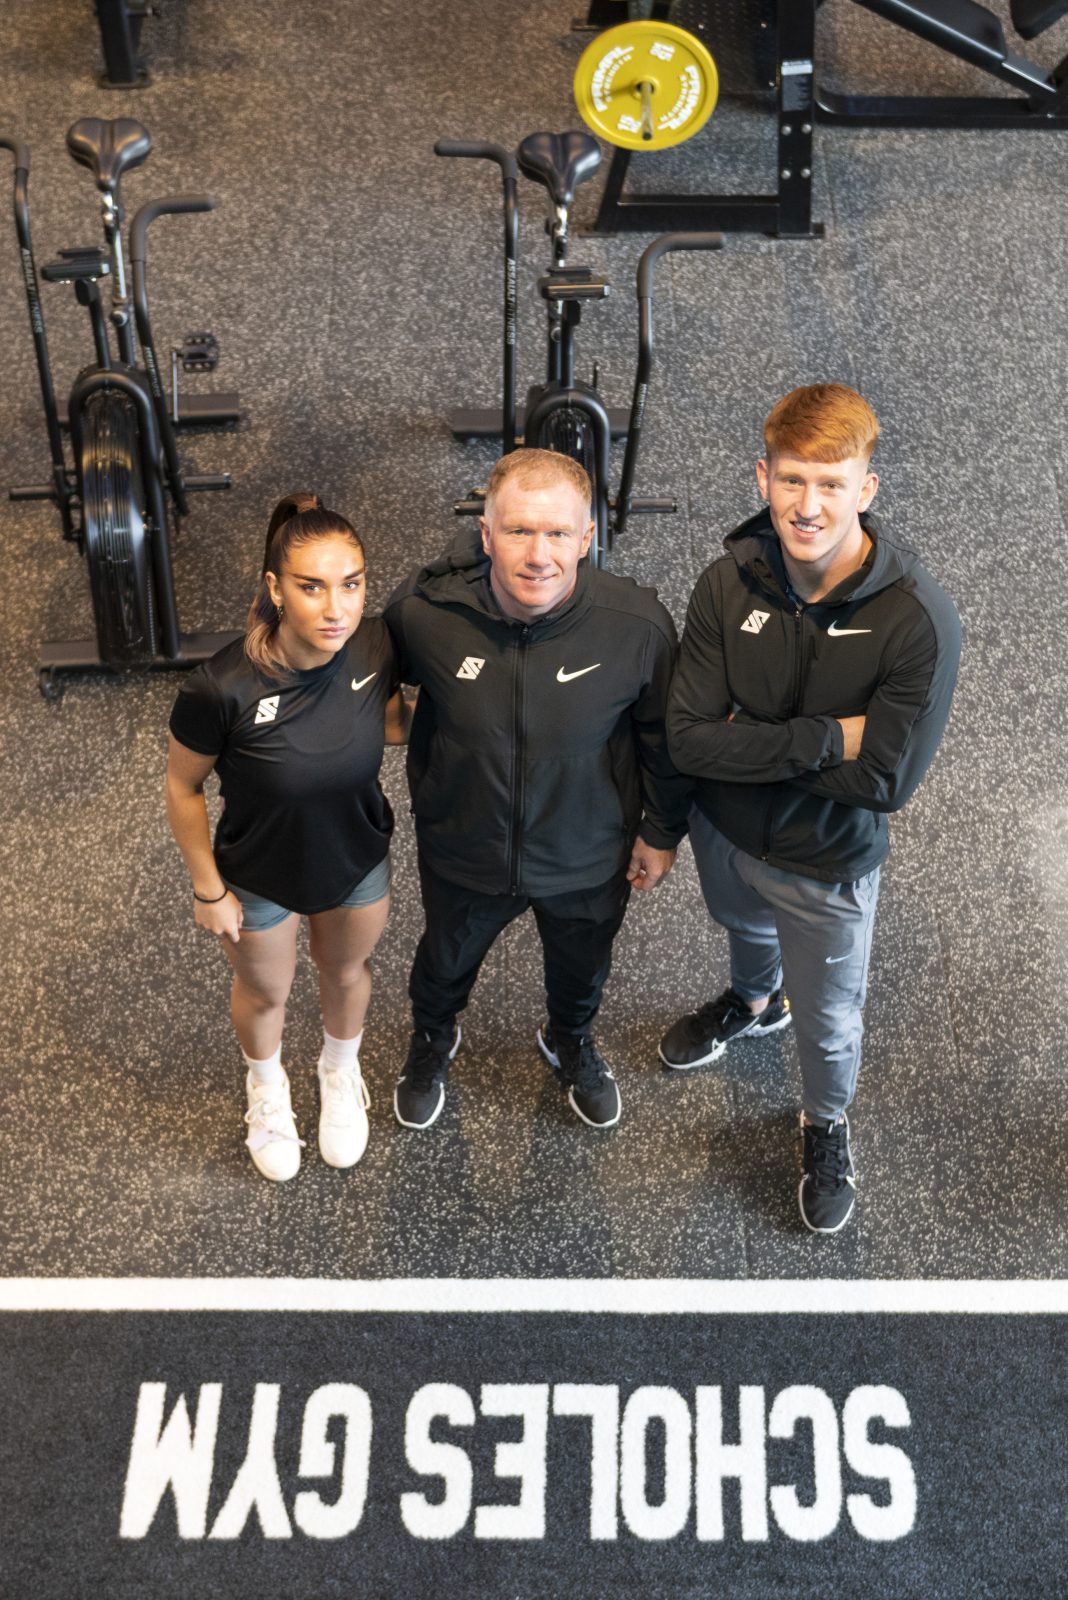 Manchester United legend Paul Scholes opens £500k Oldham gym with his children, The Manc